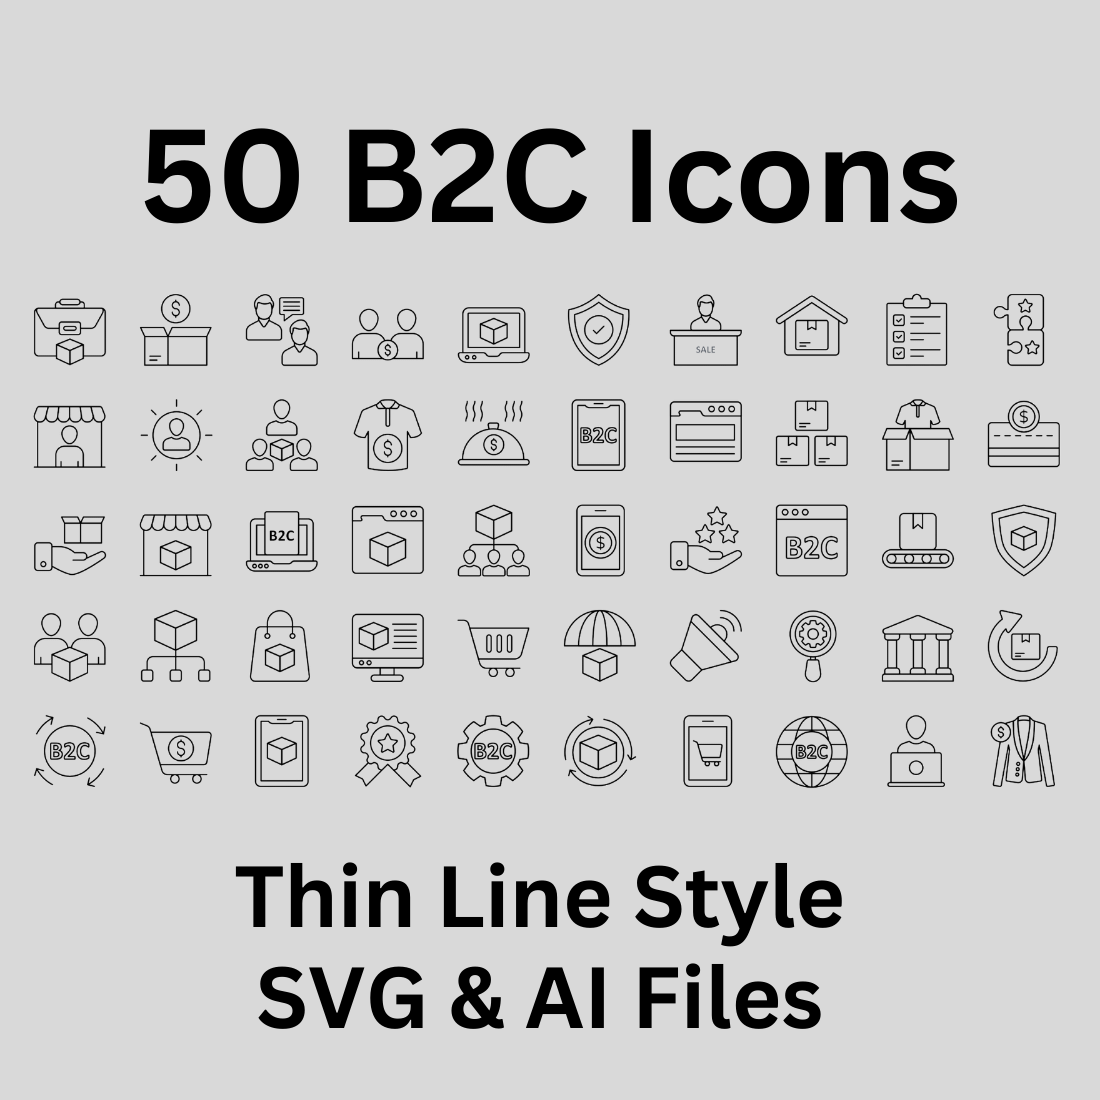 B2C Icon Set 50 Outline Icons - SVG And AI Files preview image.